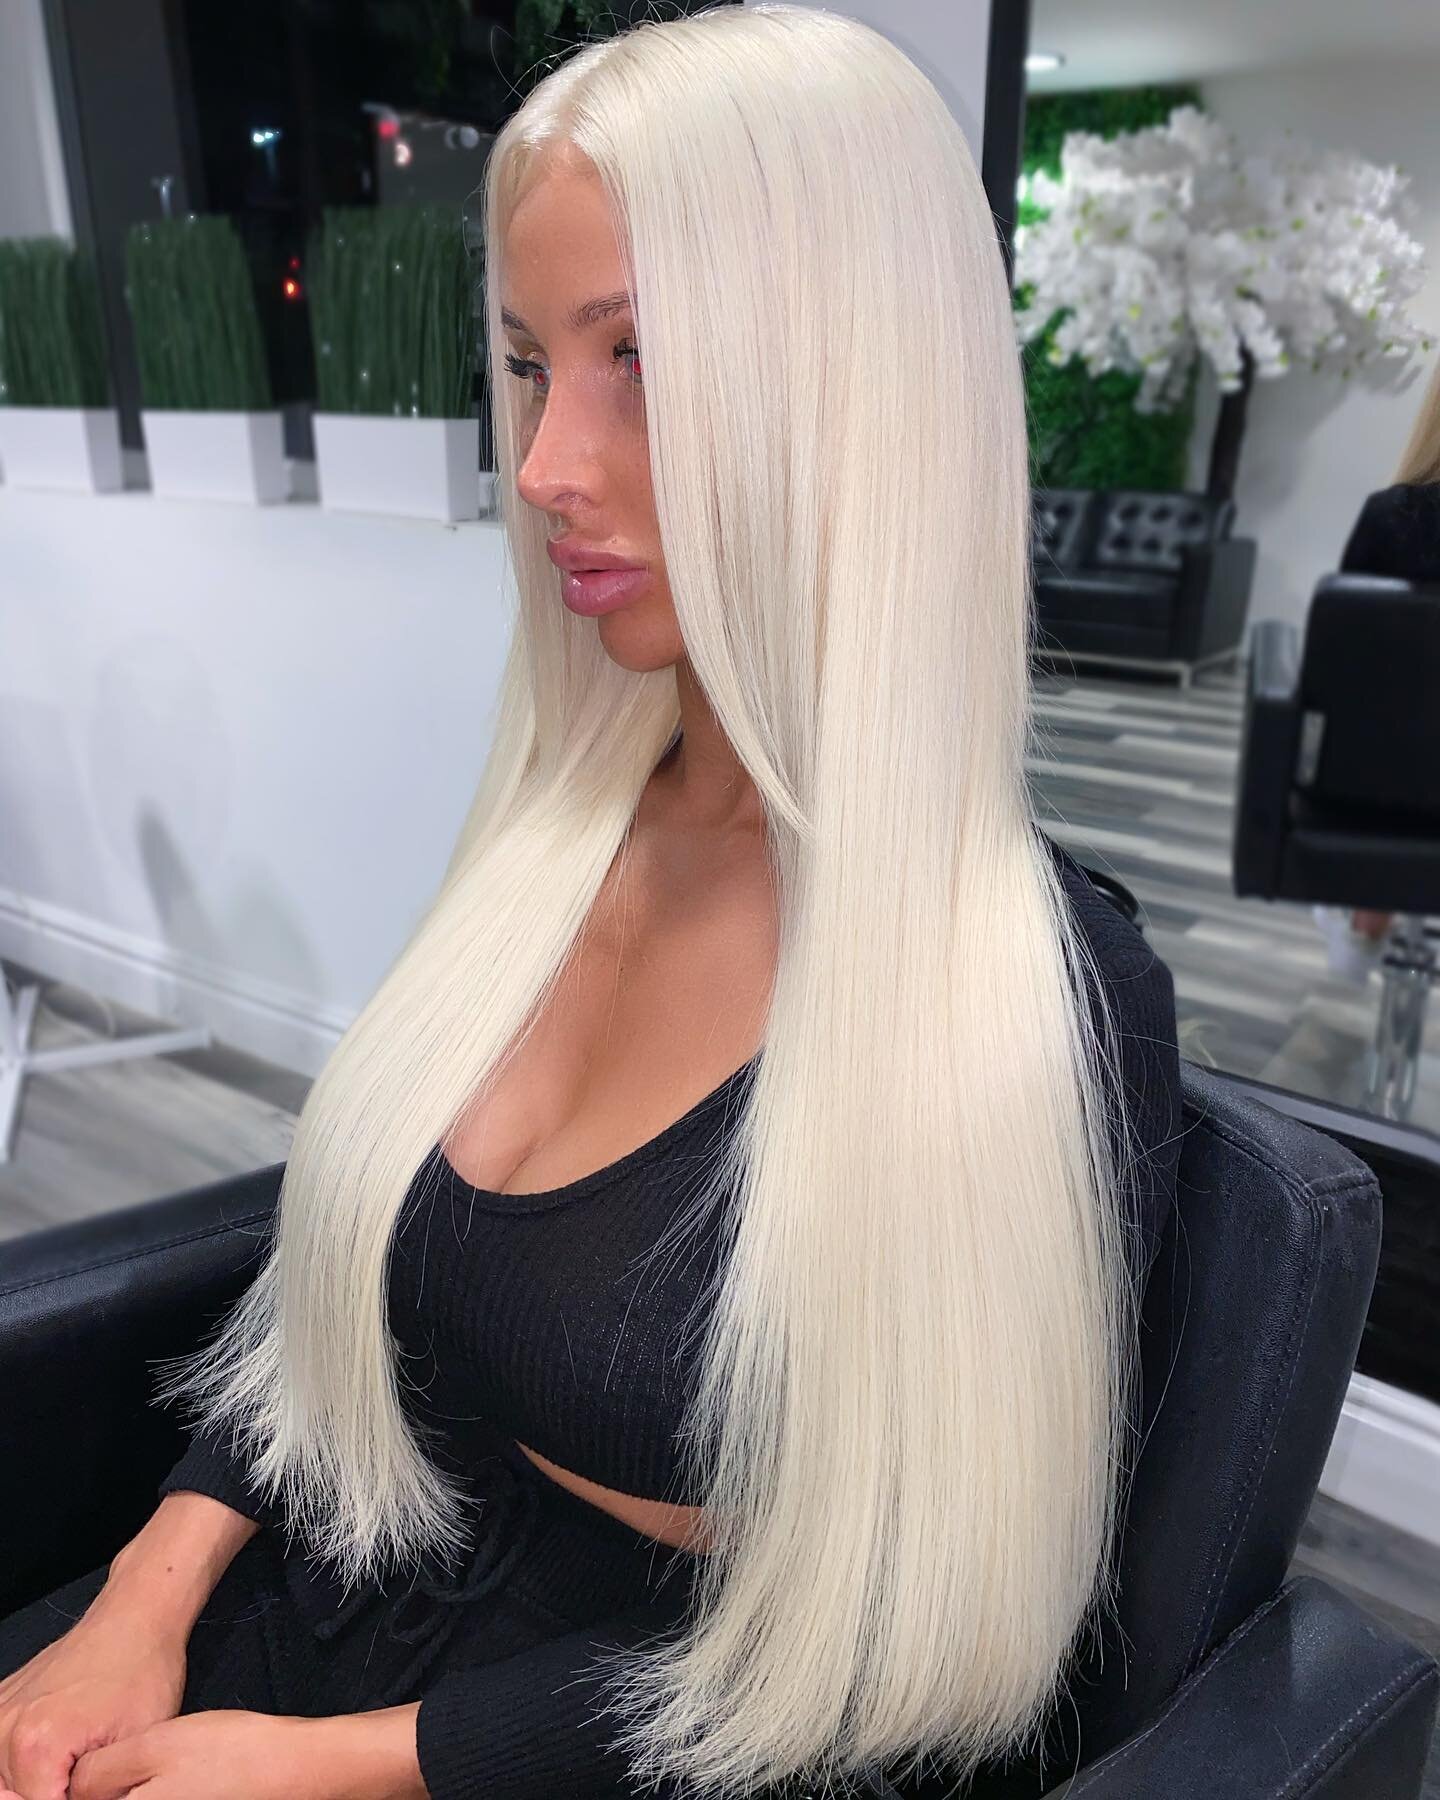 𝐄𝐥𝐥𝐢𝐨𝐭 𝐂𝐚𝐟𝐟𝐫𝐞𝐲 𝐇𝐚𝐢𝐫 𝐒𝐢𝐠𝐧𝐚𝐭𝐮𝐫𝐞 𝐏𝐚𝐜𝐤𝐚𝐠𝐞💸
Colour correction + 250grams of our luxury hair brand @opulencebyelliotcaffrey in shade &lsquo;Snow&rsquo; 24&rdquo;. For all bookings and enquiries please call the salon on 012